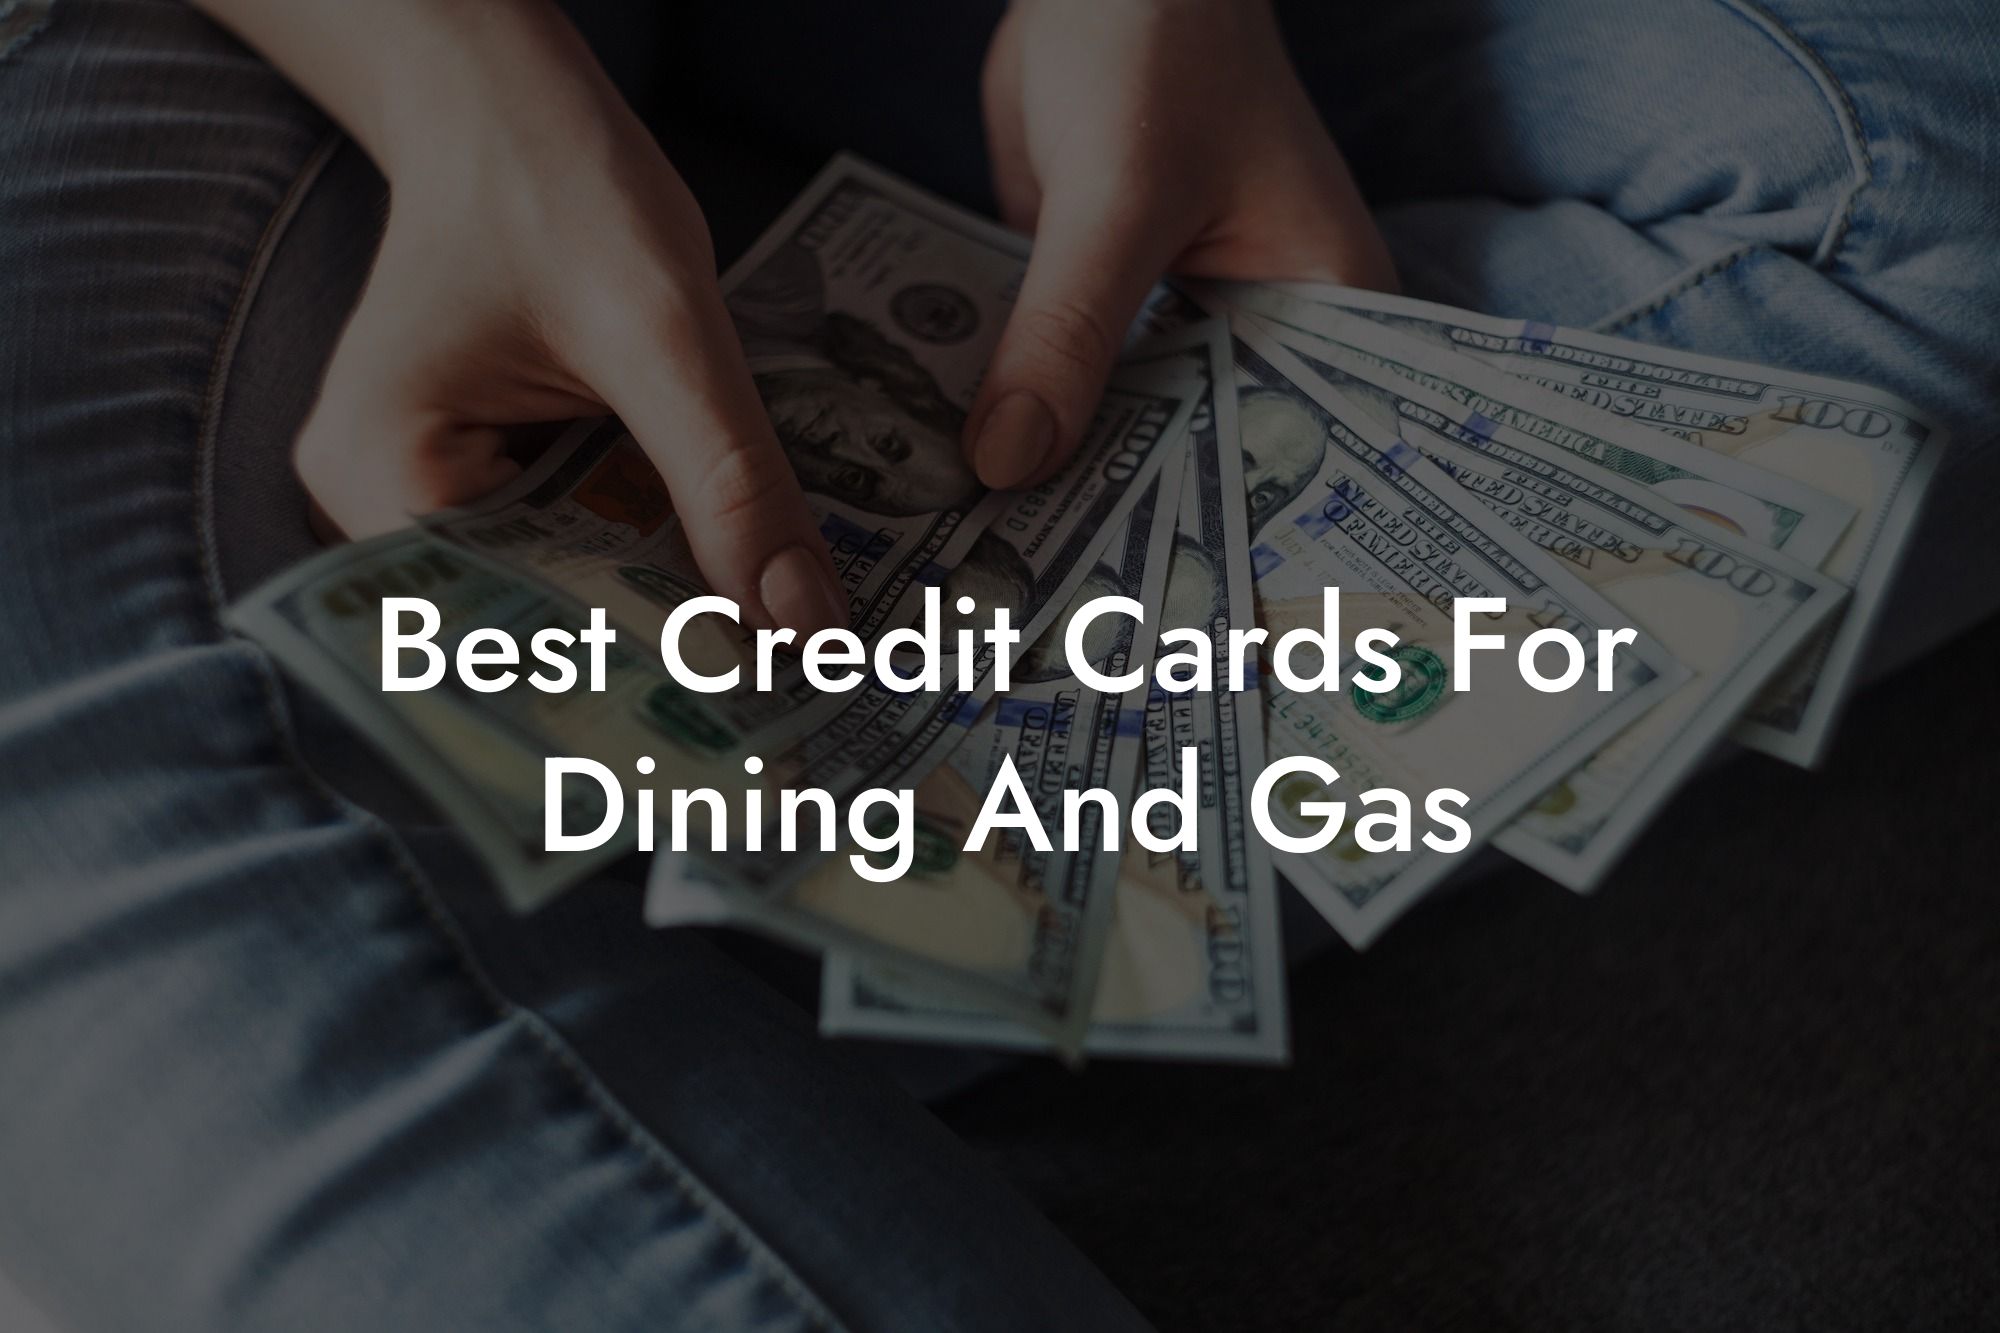 Best Credit Cards For Dining And Gas